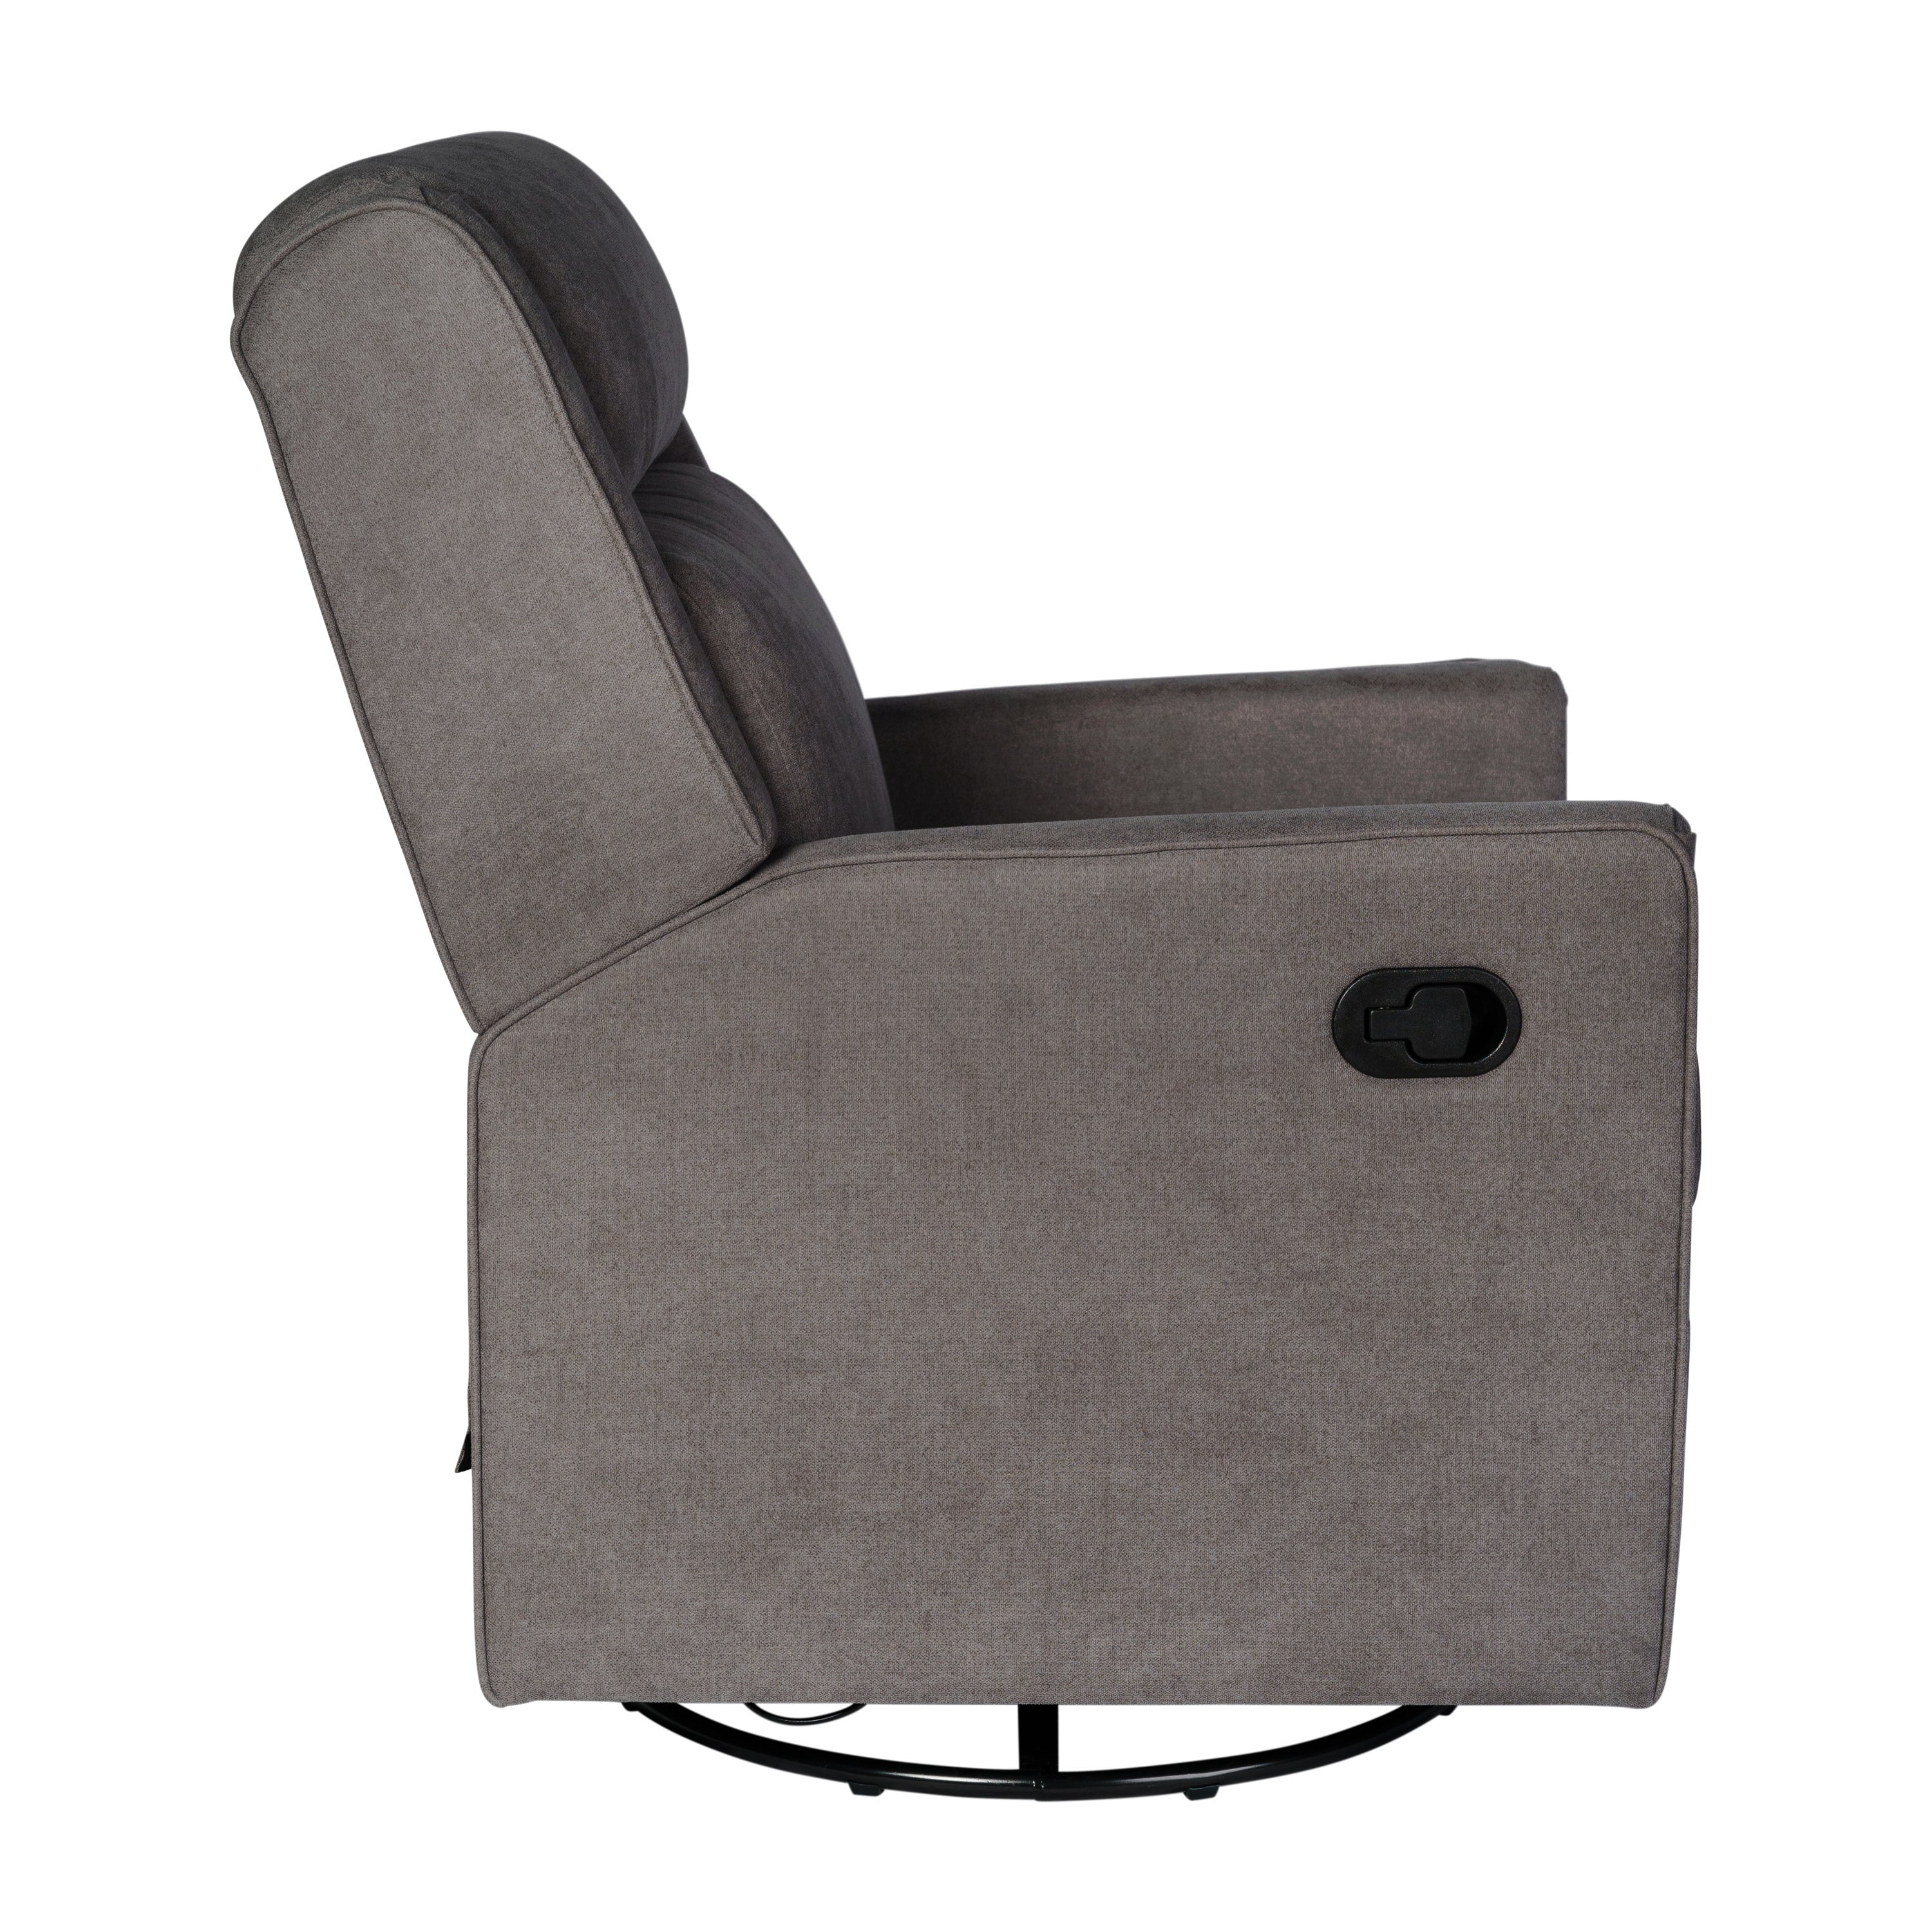 Cash Swivel Glider Rocker Recliner Chair, Manual 360 Degree Swivel Recliner Perfect for Living Room, Bedroom, or Nursery-Manual Recliners-Flash Furniture-Wall2Wall Furnishings